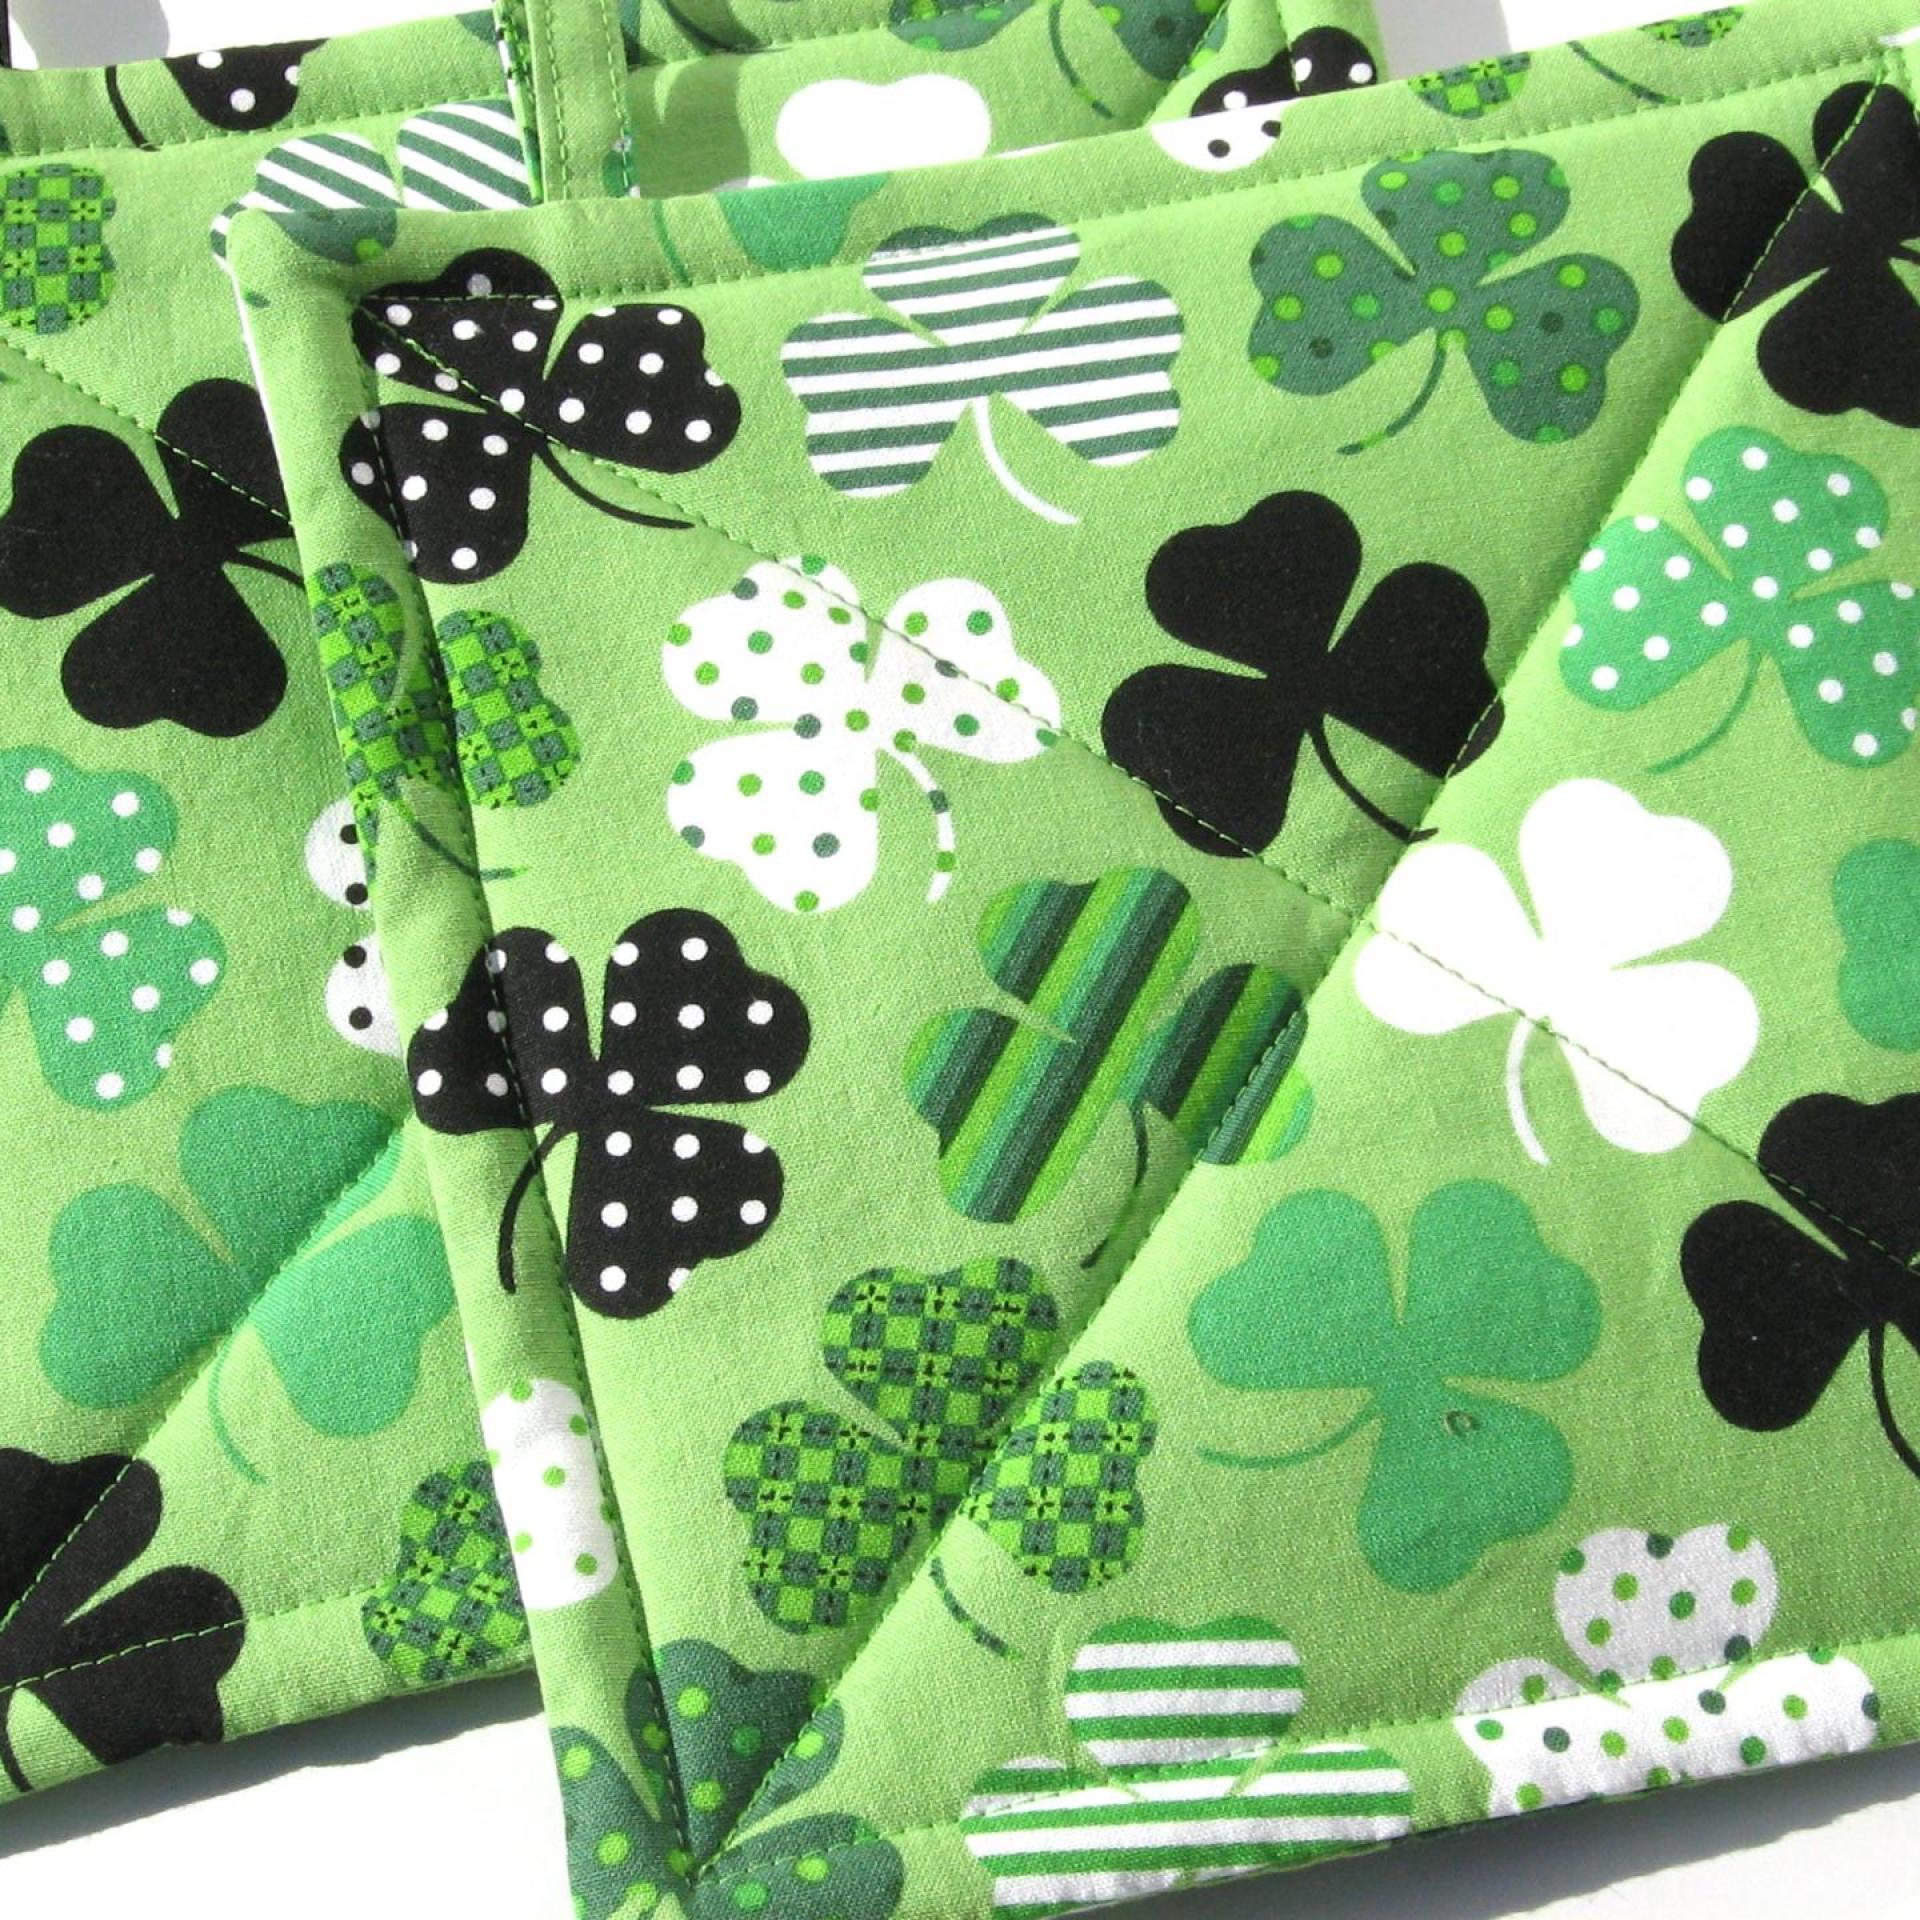 Shamrock Potholders with Dots and Stripes on a Green Background, St Patrick's Day Décor, USA Handmade Hot Pads, Housewarming Gift